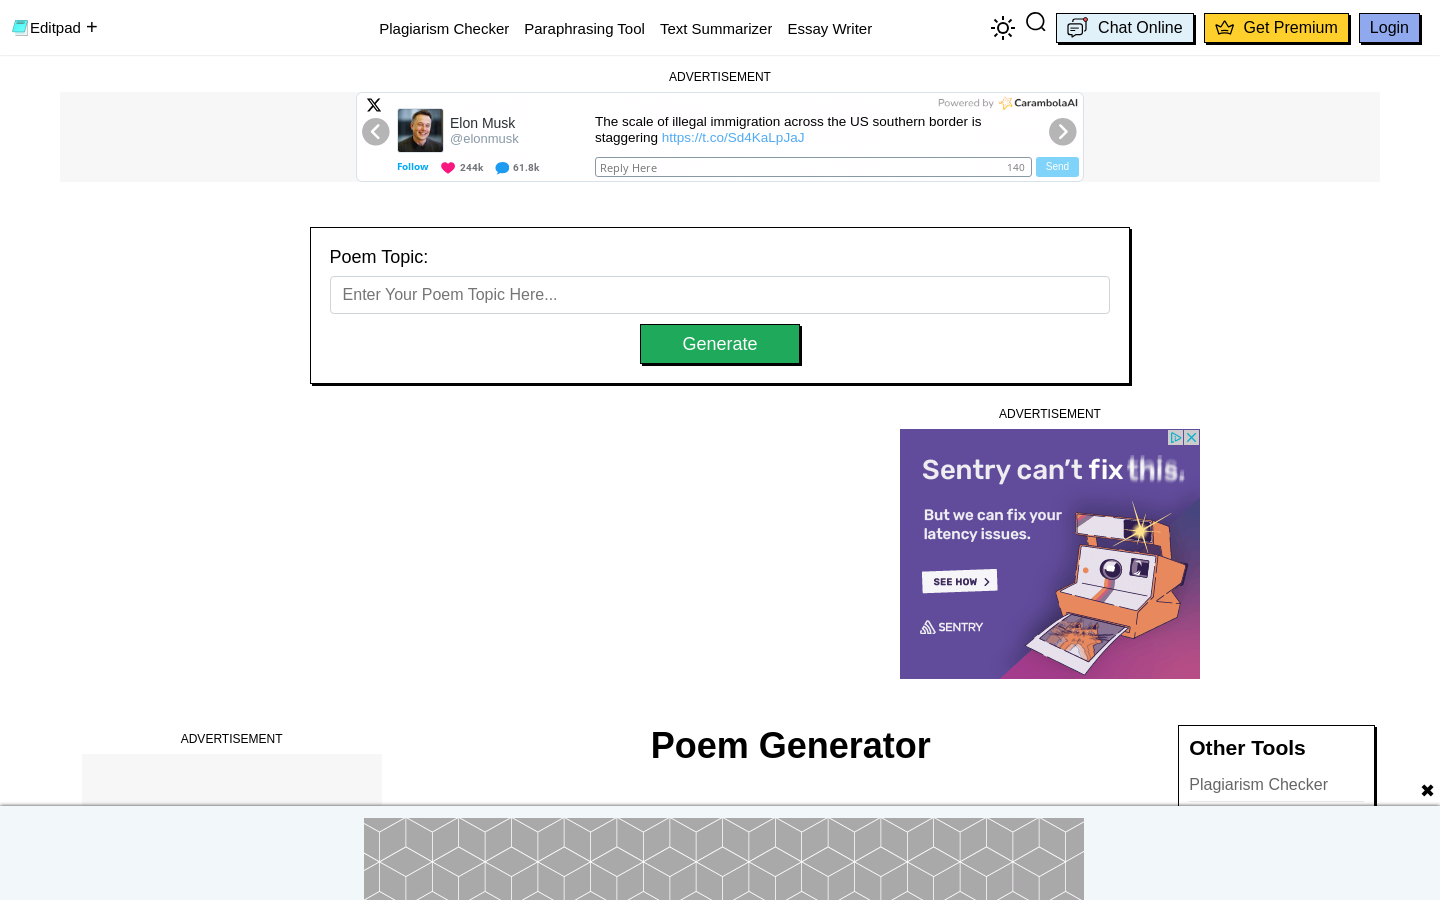 Poem Generator by Editpad preview